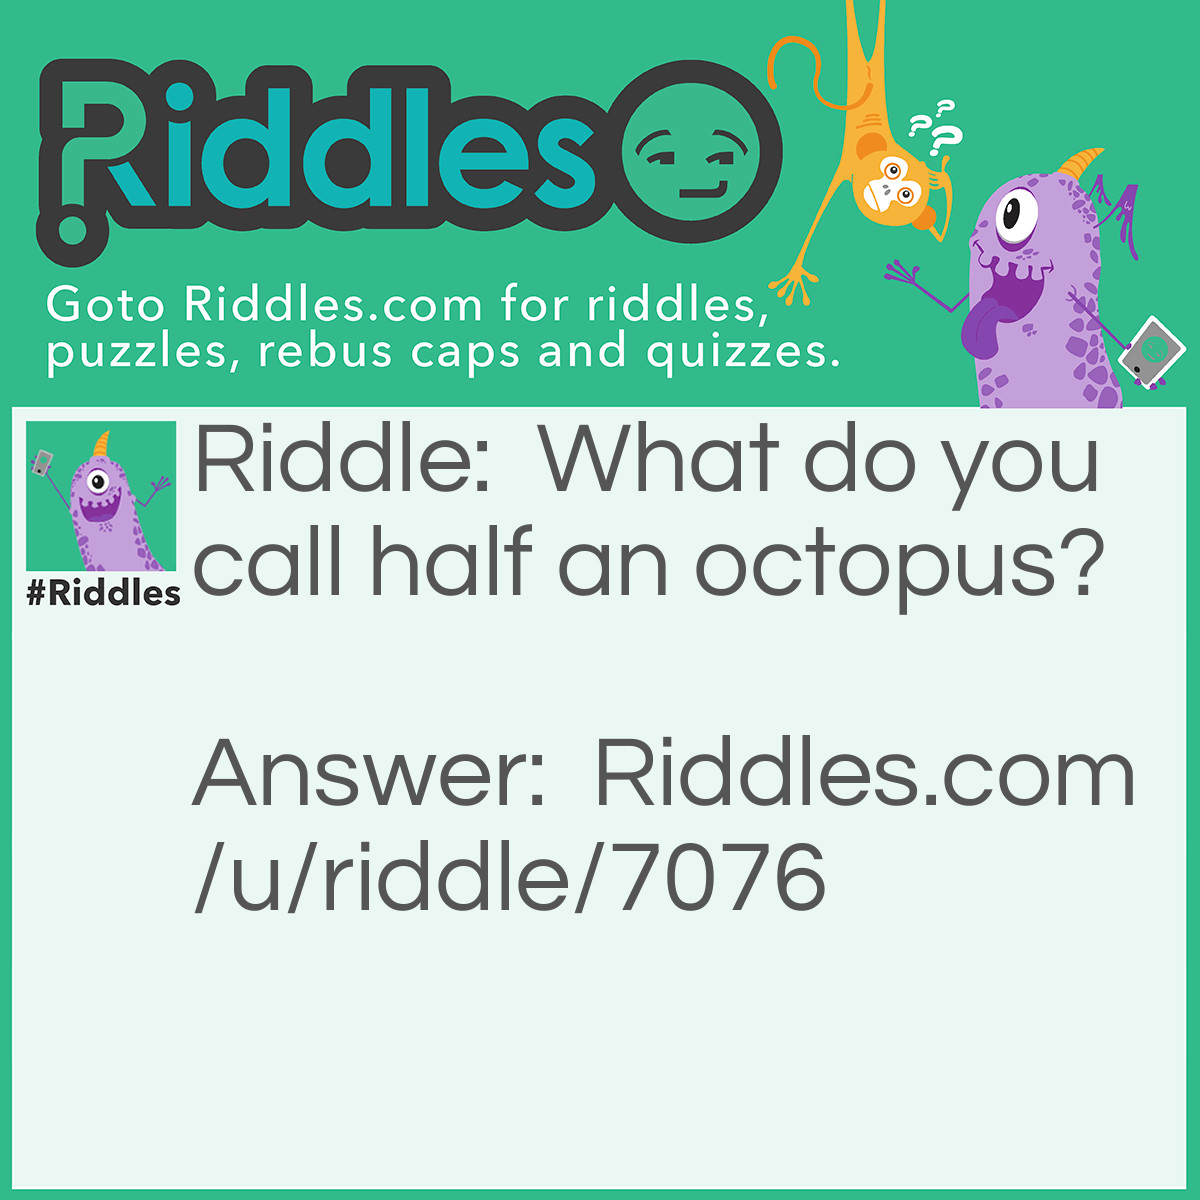 Riddle: What do you call half an octopus? Answer: A horse.